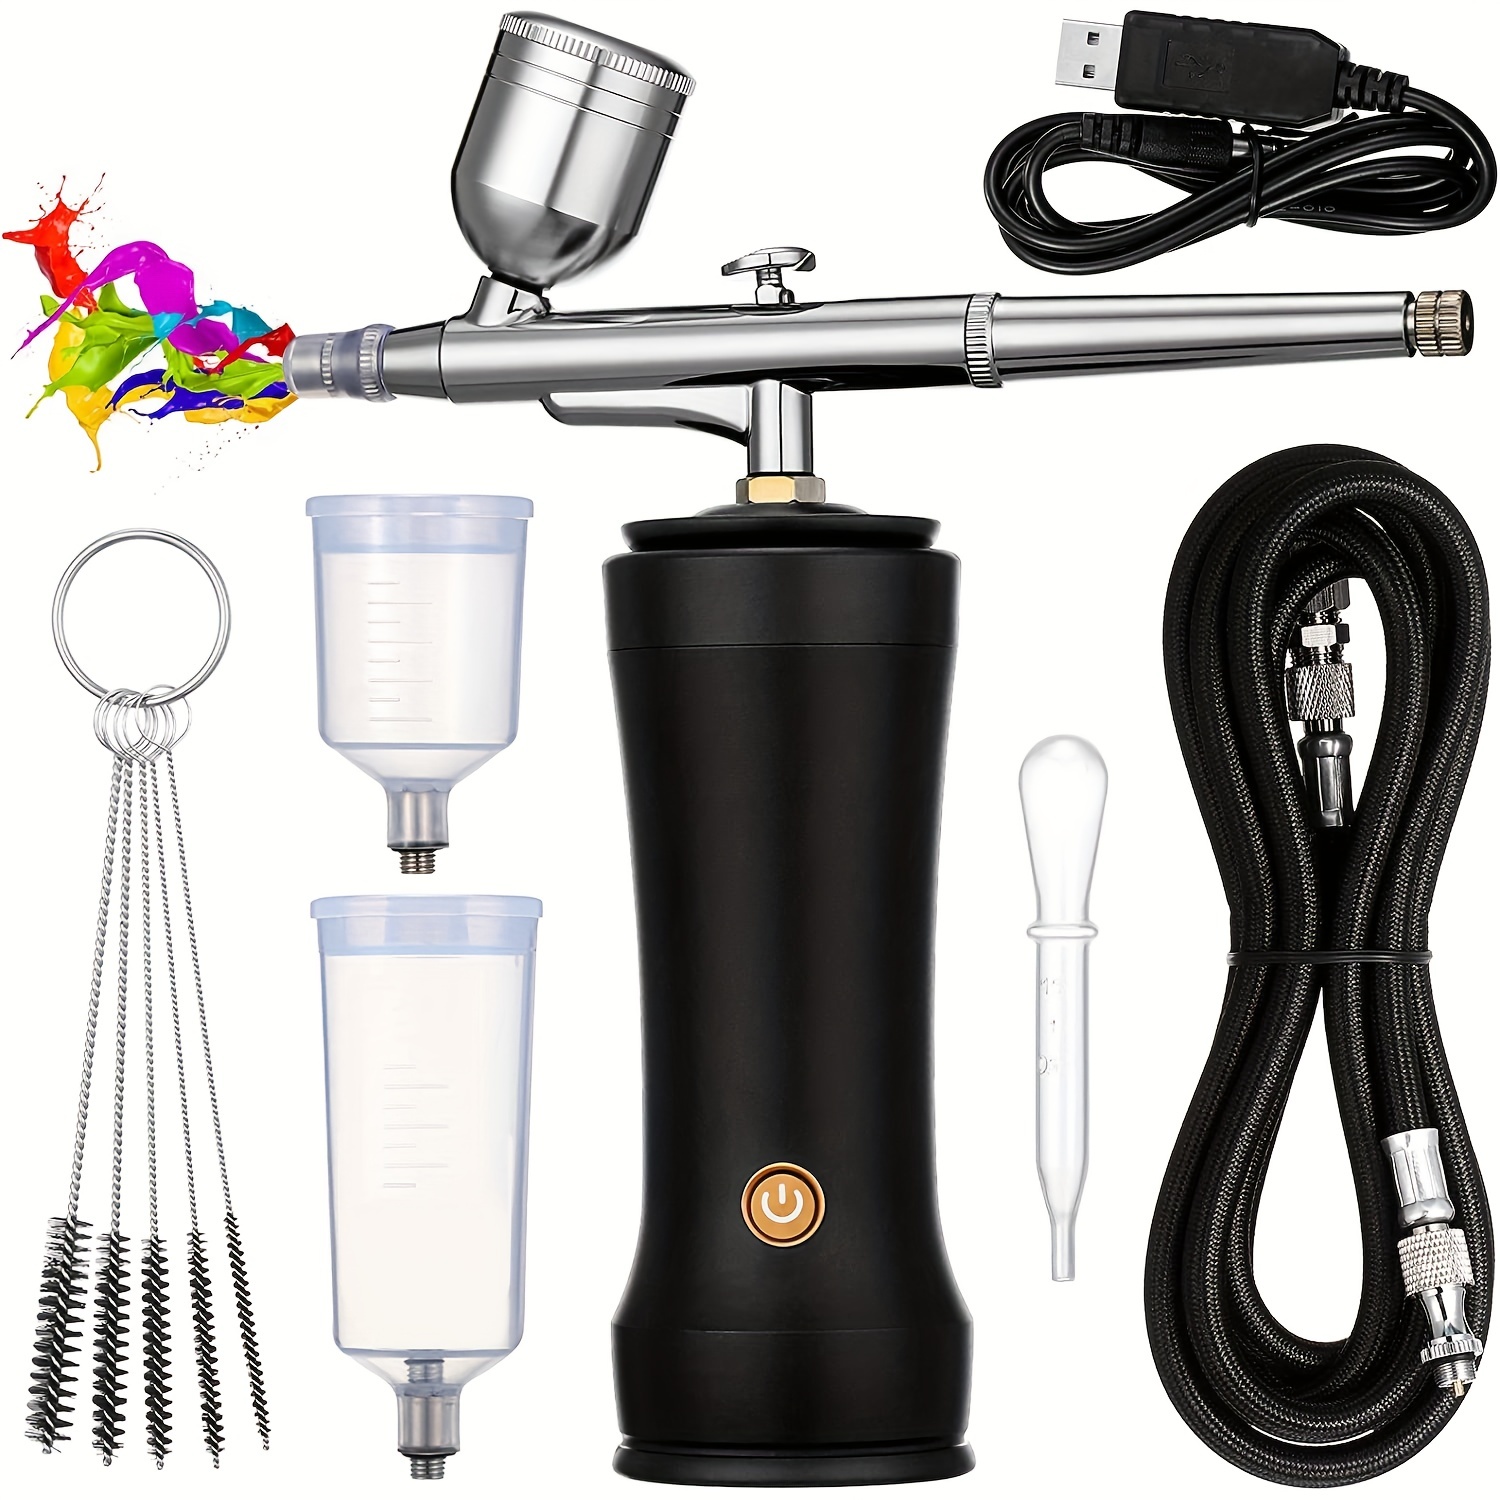 Dual Battery Airbrush Set, With A Backup Battery That Can Be Replaced And  Used. Airbrush Kit With Compressor 30PSI Air Brush Gun Rechargeable Portable